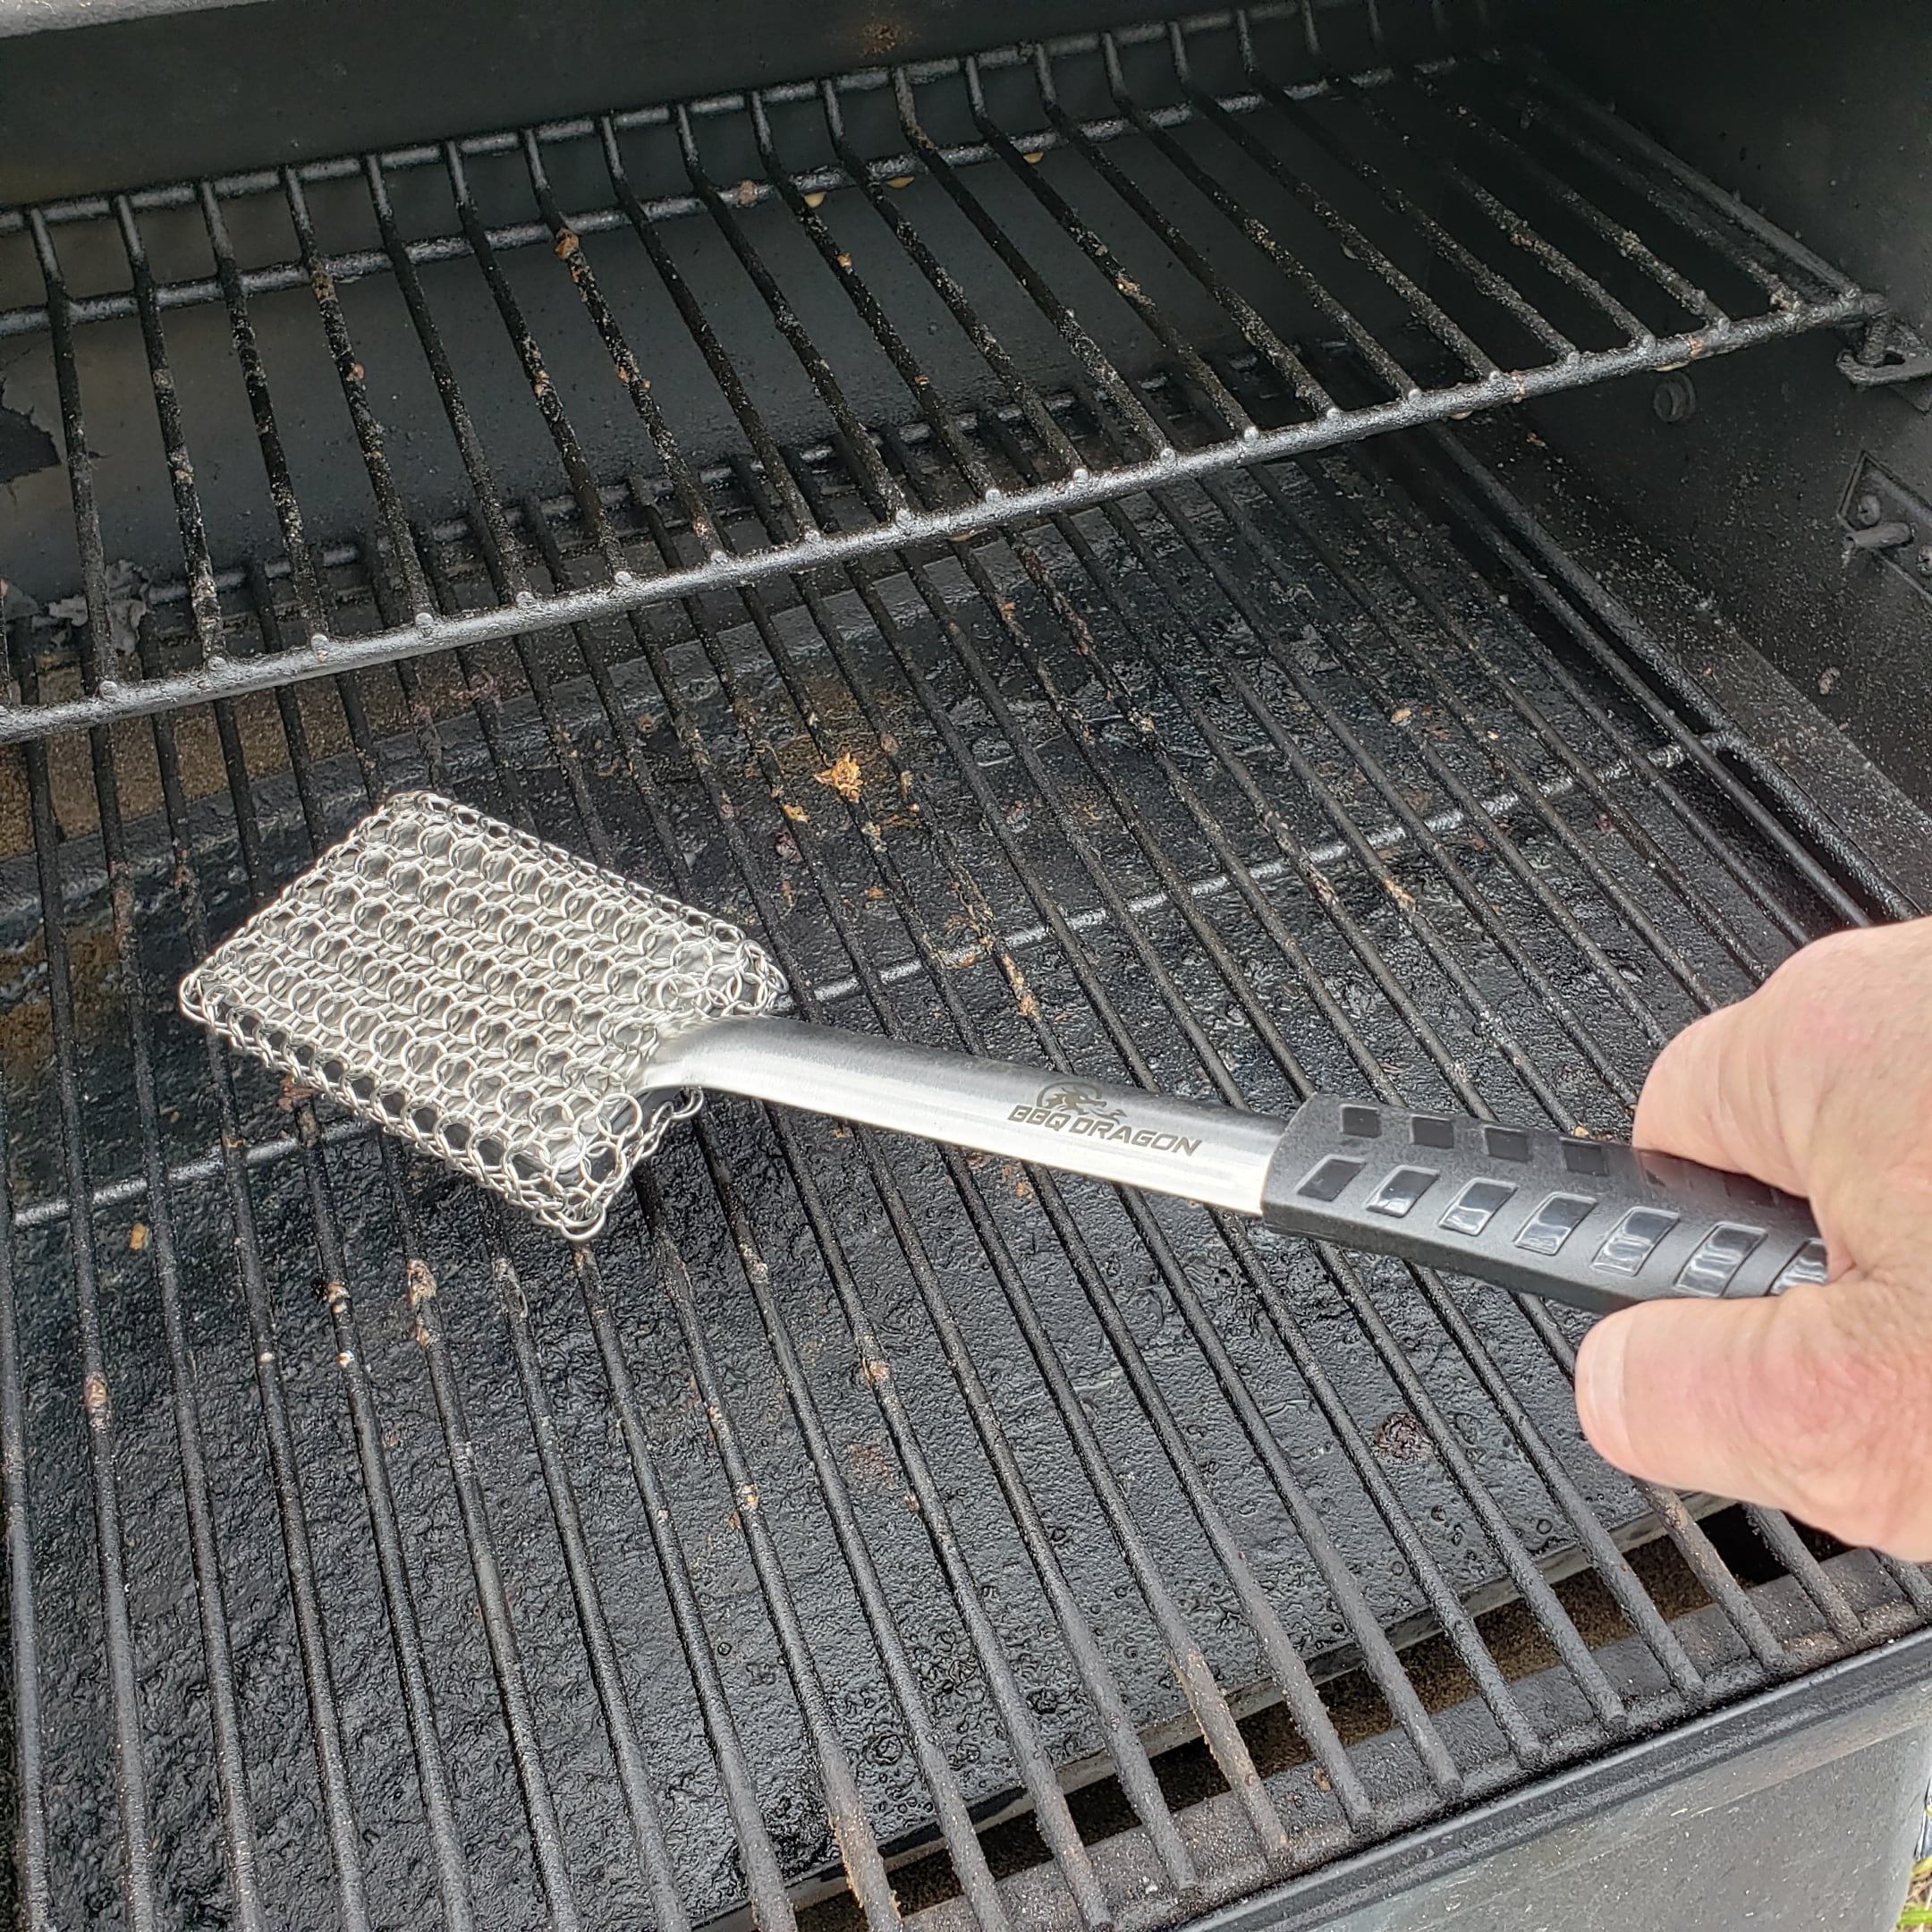 Grill Rescue BBQ Replaceable Scraper Cleaning Head, Bristle Free - Safe,  Durable and Unique Scraper Tools for Cast Iron or Stainless-Steel Grates